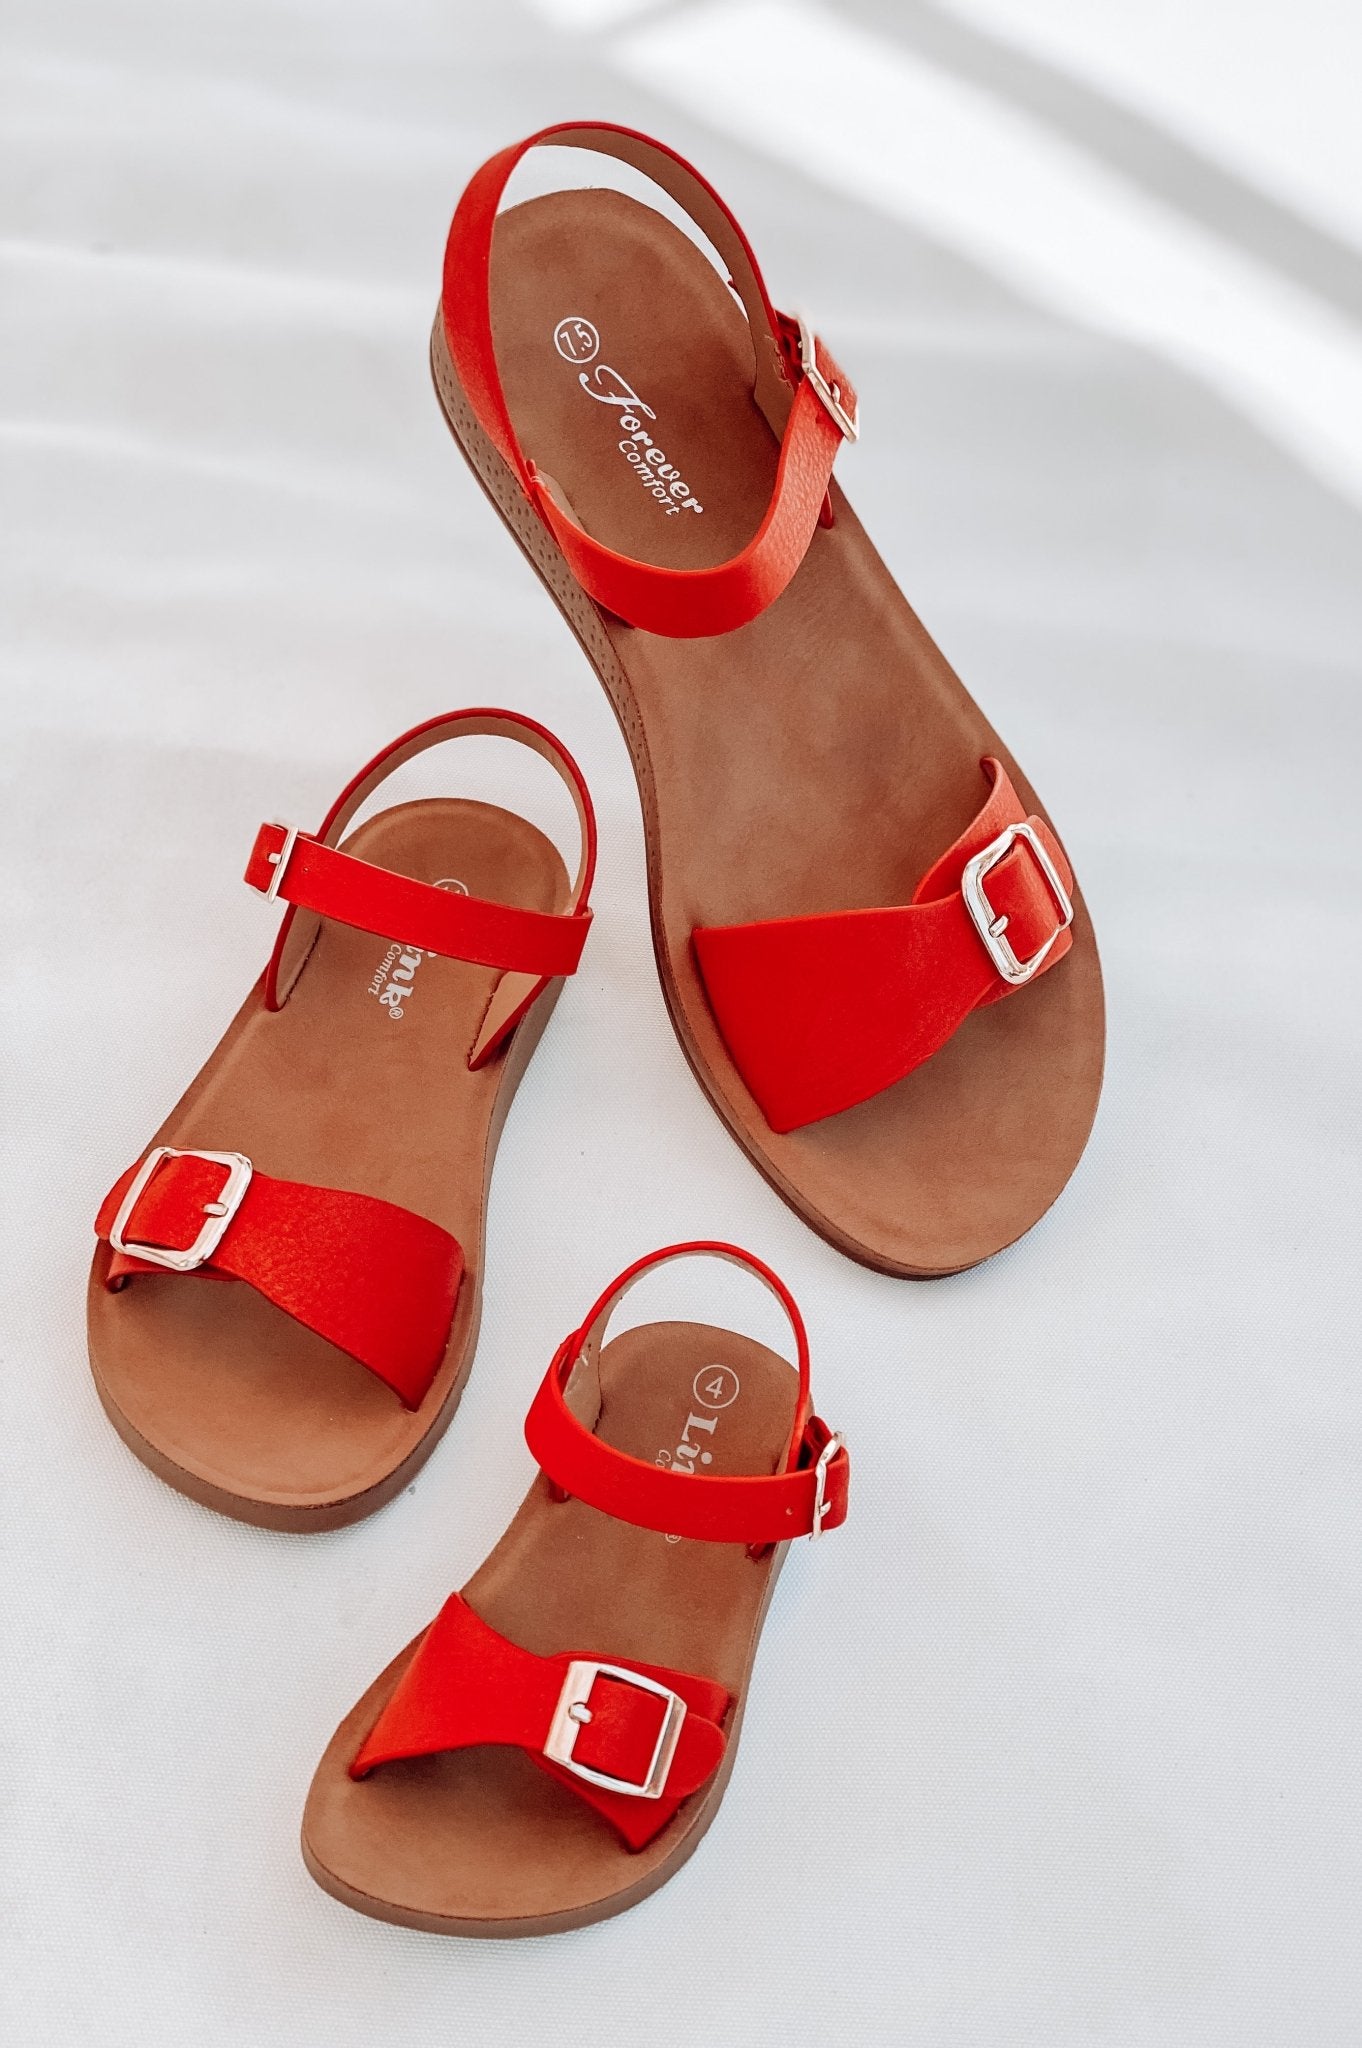 Red Comfort Ankle Mommy and Me Matching Sandals - LITTLE MIA BELLA